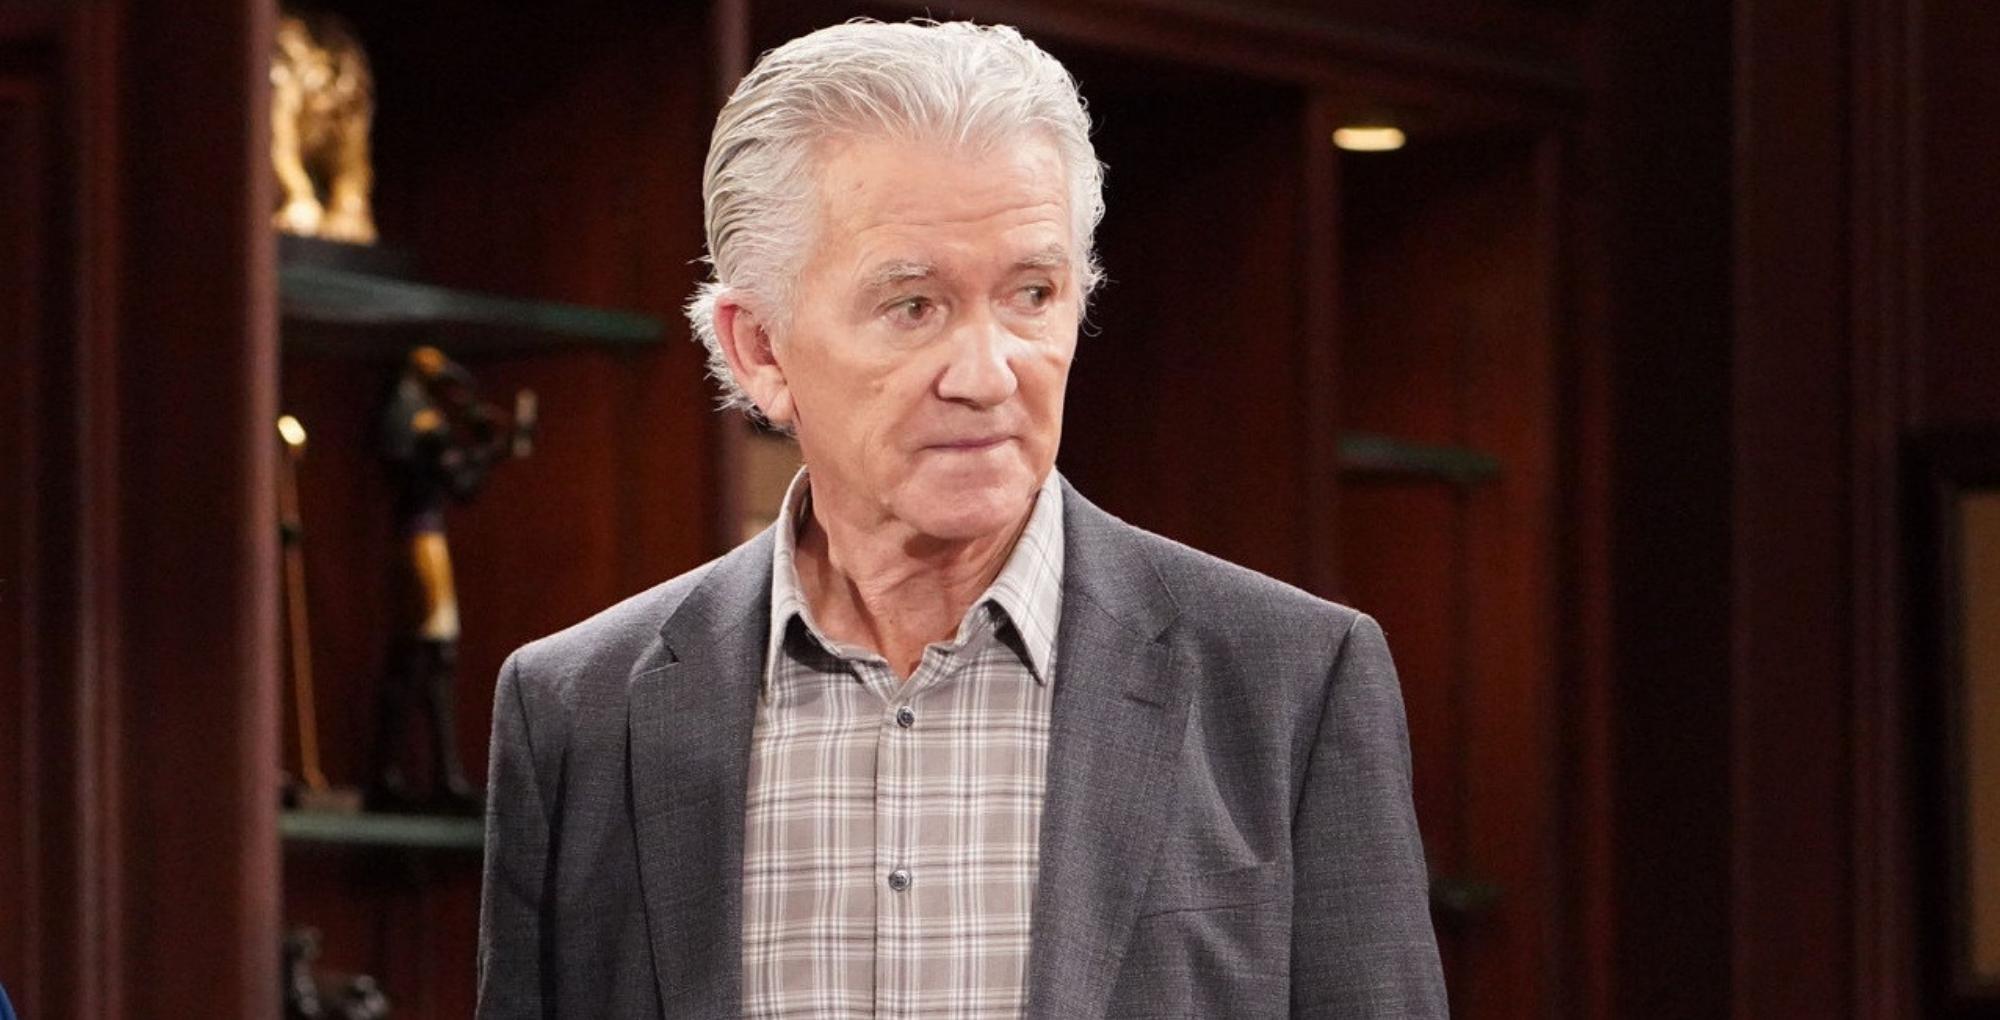 the bold and the beautiful spoilers for march 23, 2023 have stephen logan back in town